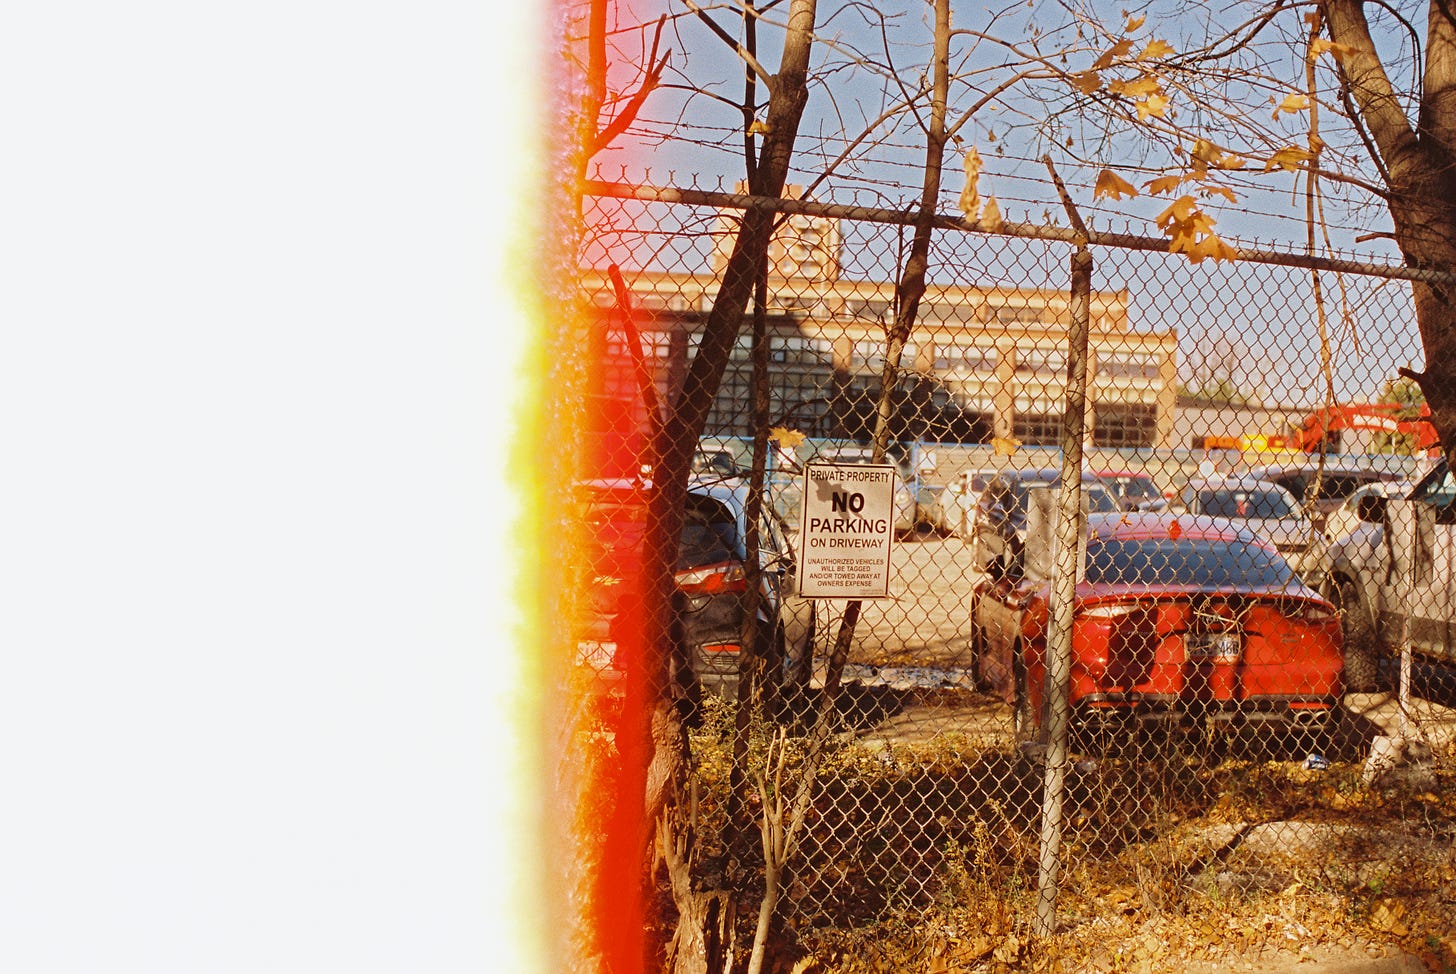 A photograph of a chain link fence, cars parked, and a tree. The left edge is blank where the film was overexposed.